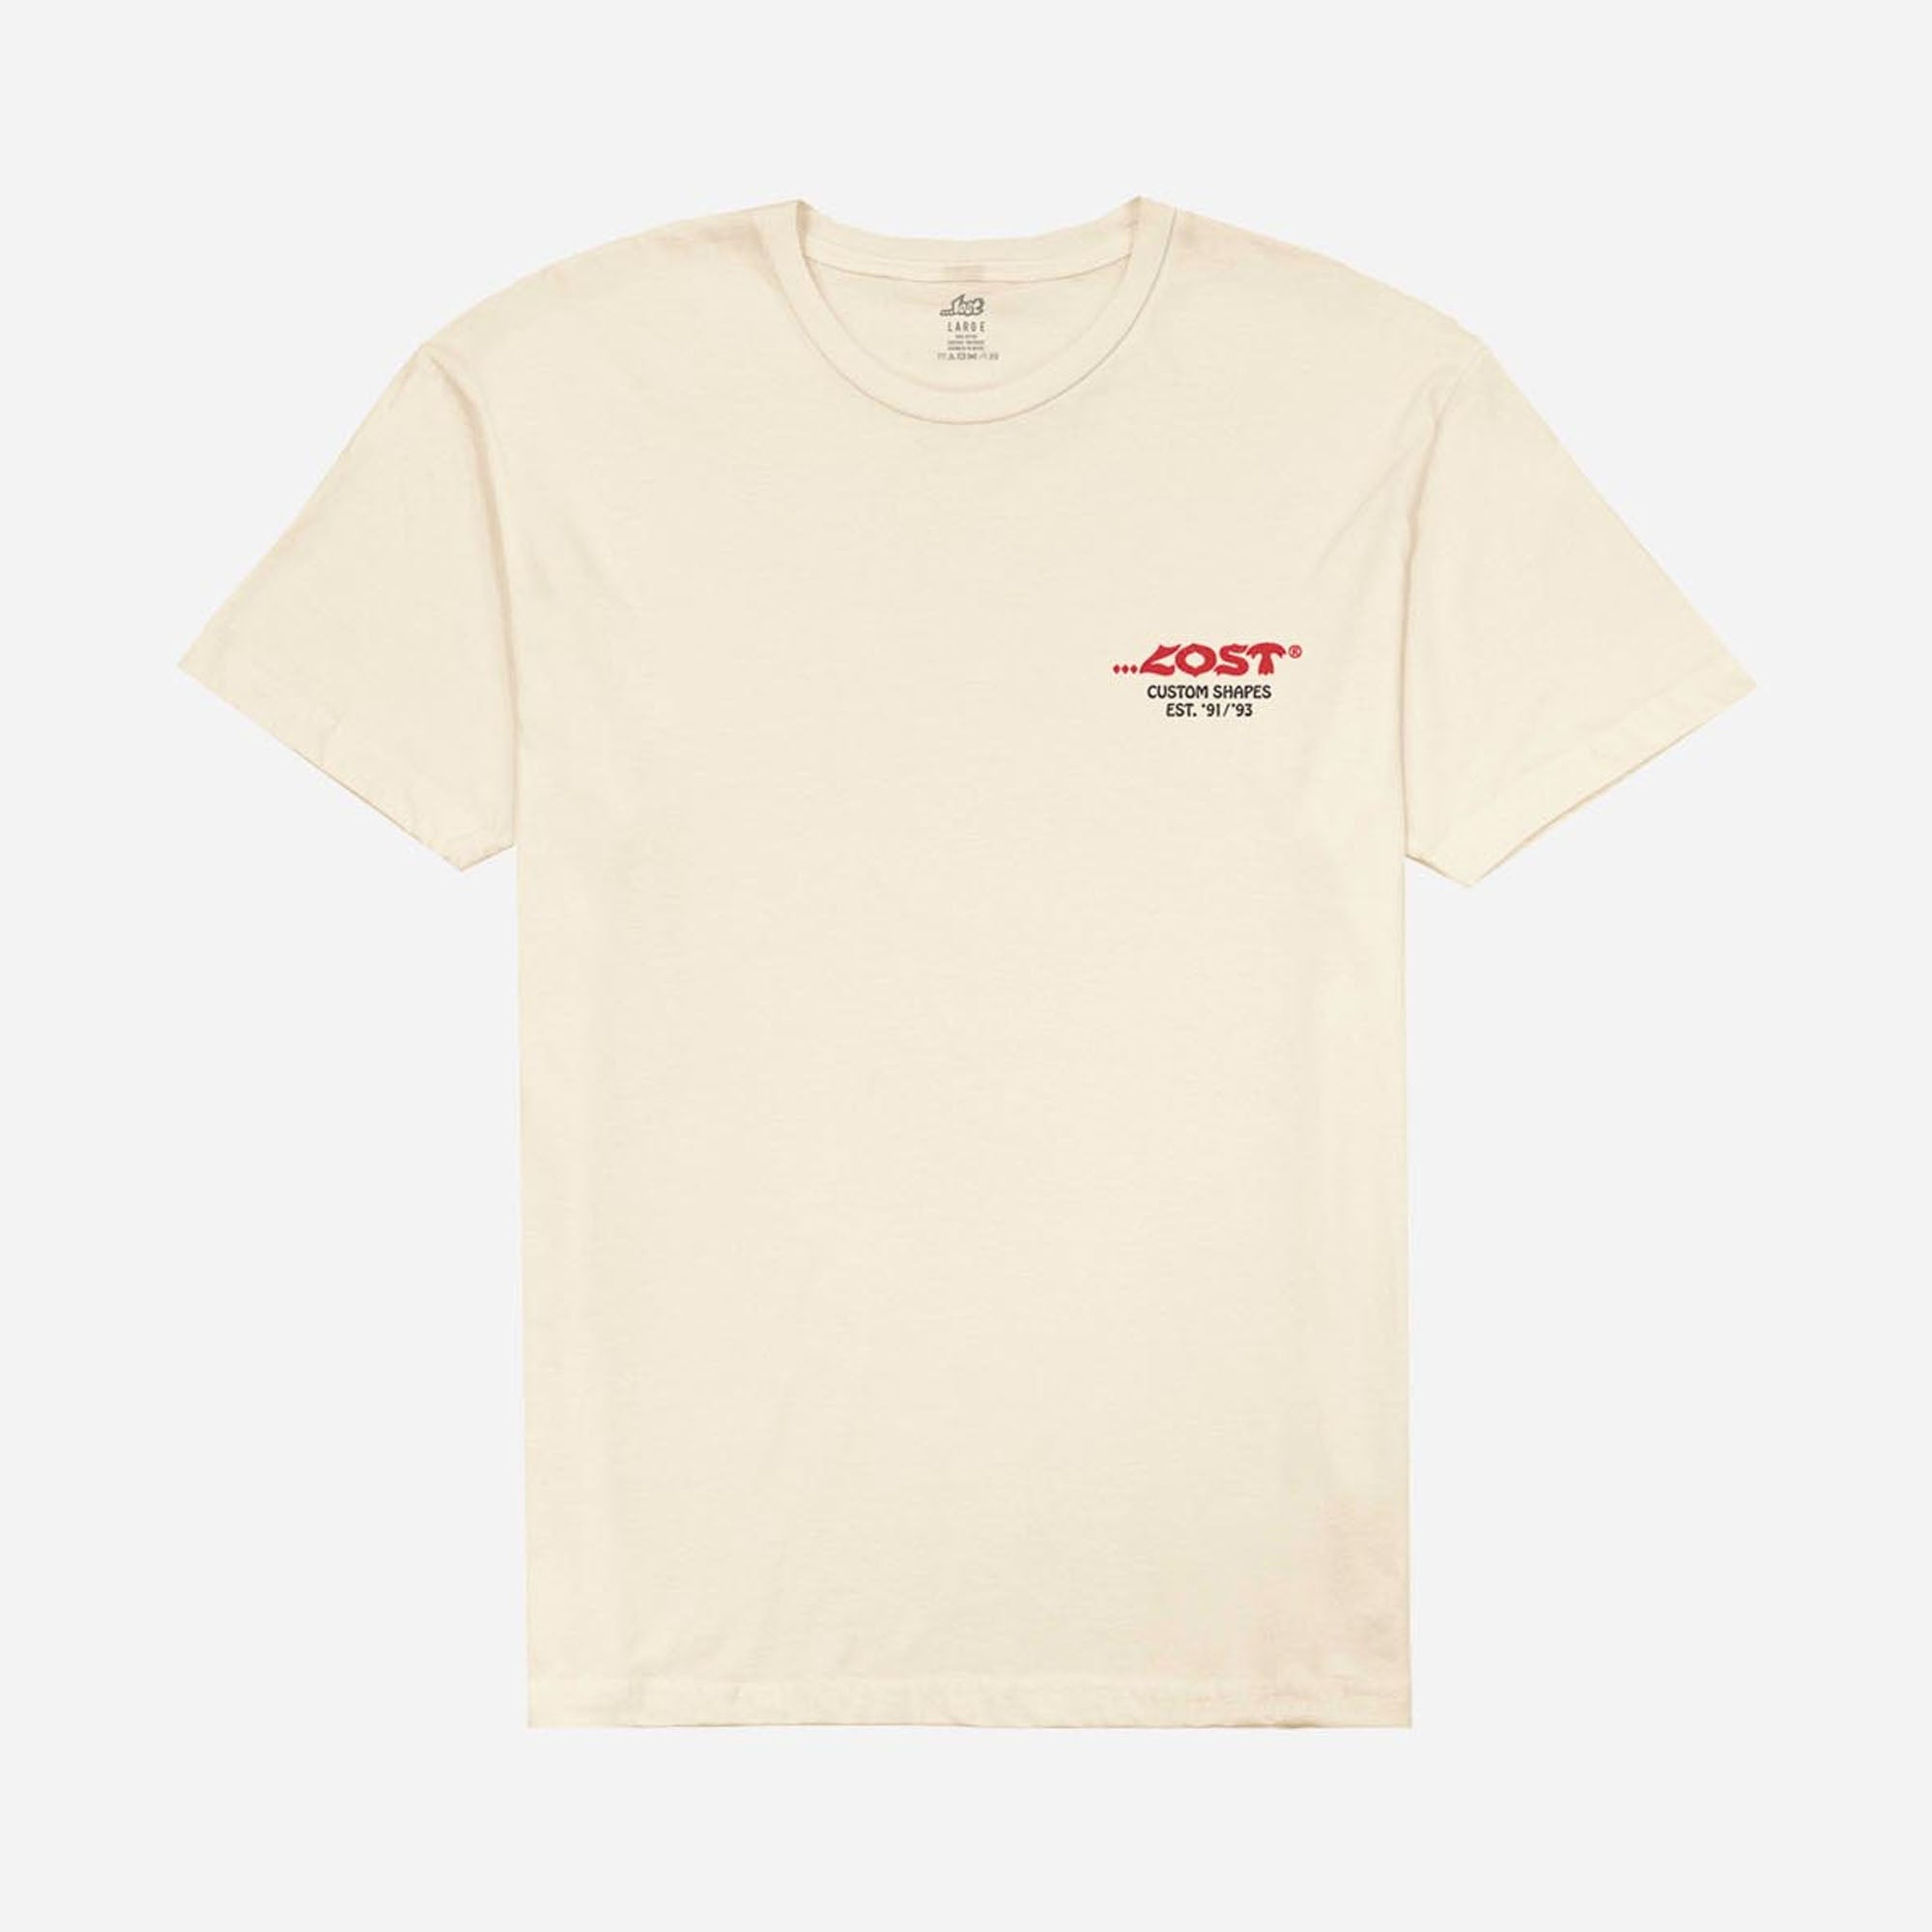 Lost Southbound Men's S/S T-Shirt